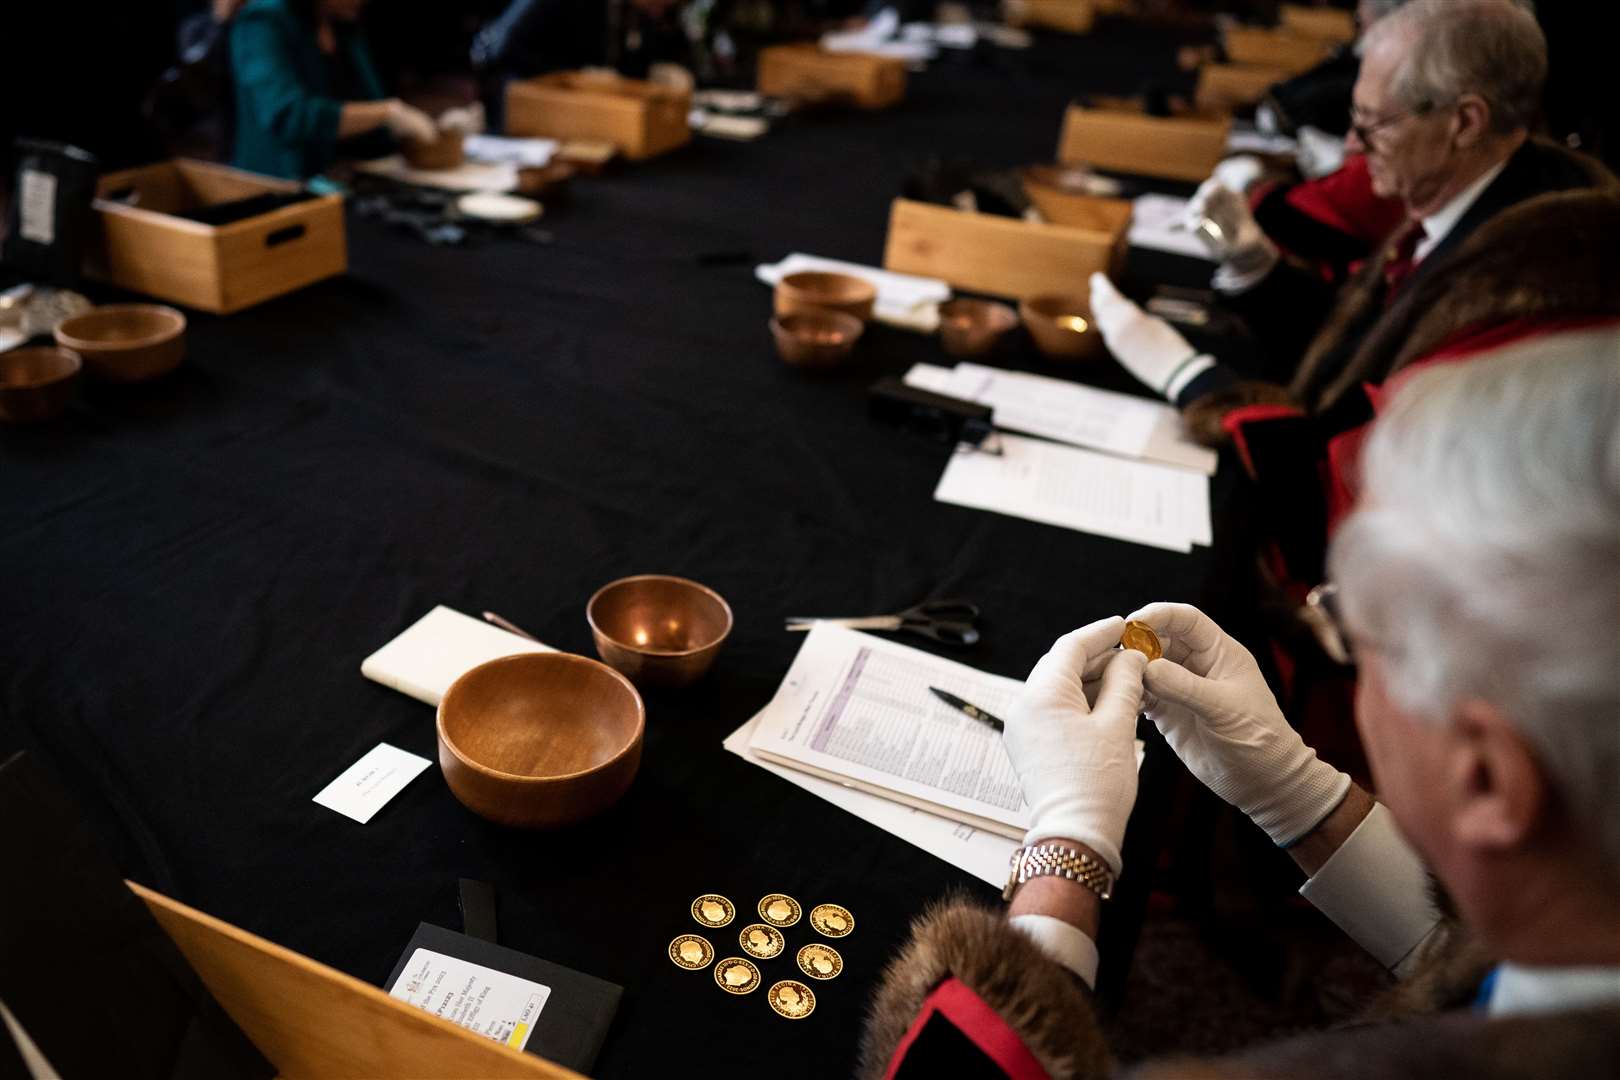 Coins are assessed at Goldsmiths’ Hall in London (Aaron Chown/PA)